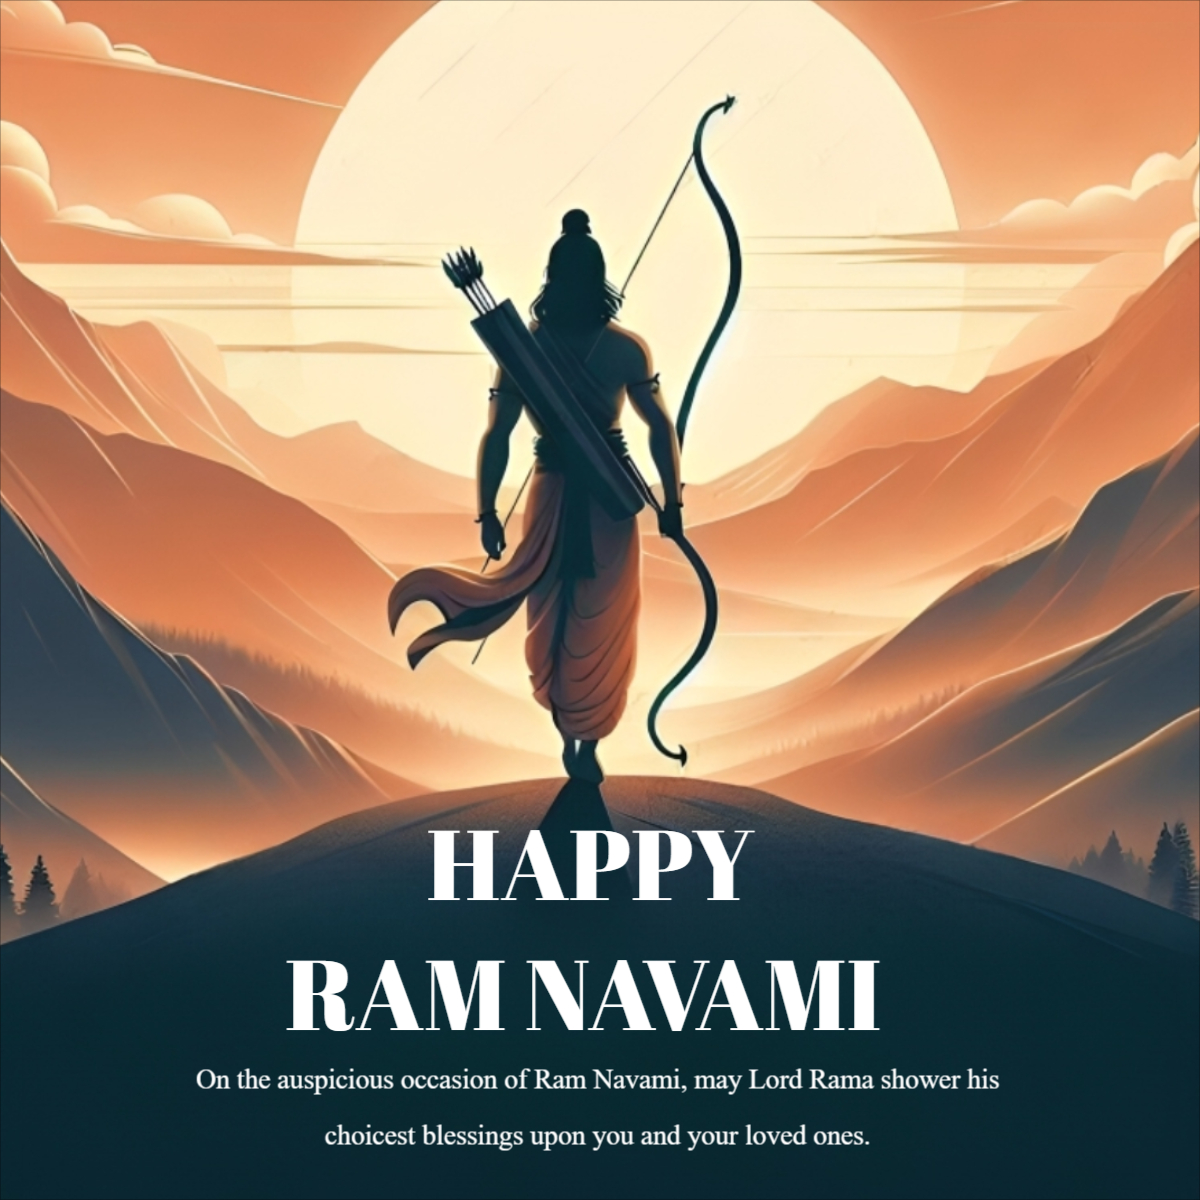 Happy Shree Ram Nawami  Greeting Vector Design Download For Free